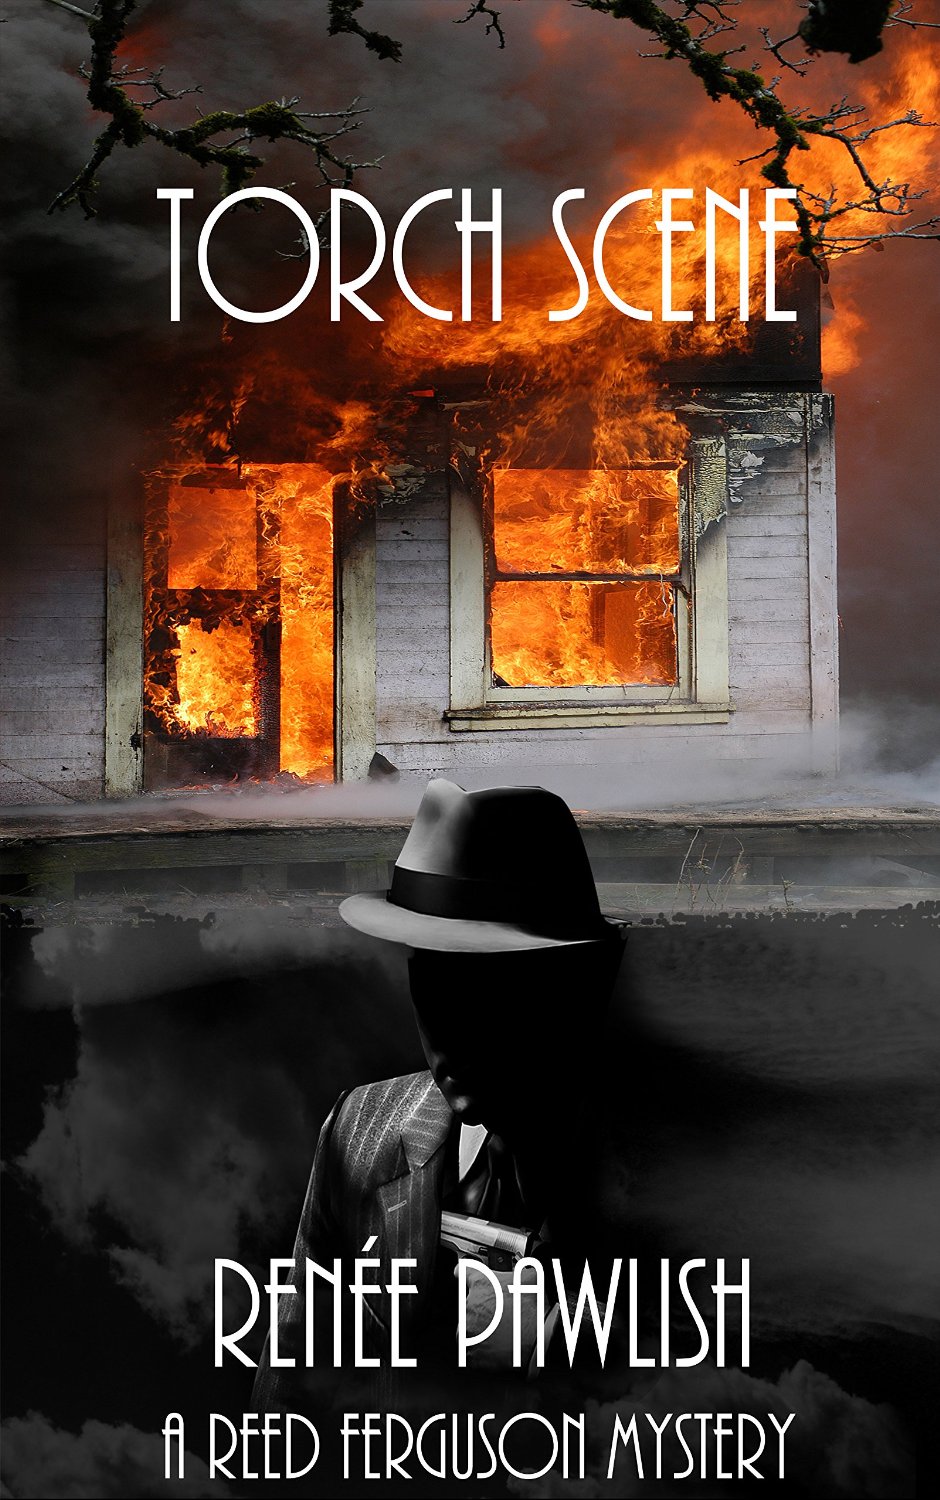 Torch Scene: A Reed Ferguson Mystery (A Private Investigator Mystery Series – Crime Suspense Thriller Book 6) by Renee Pawlish